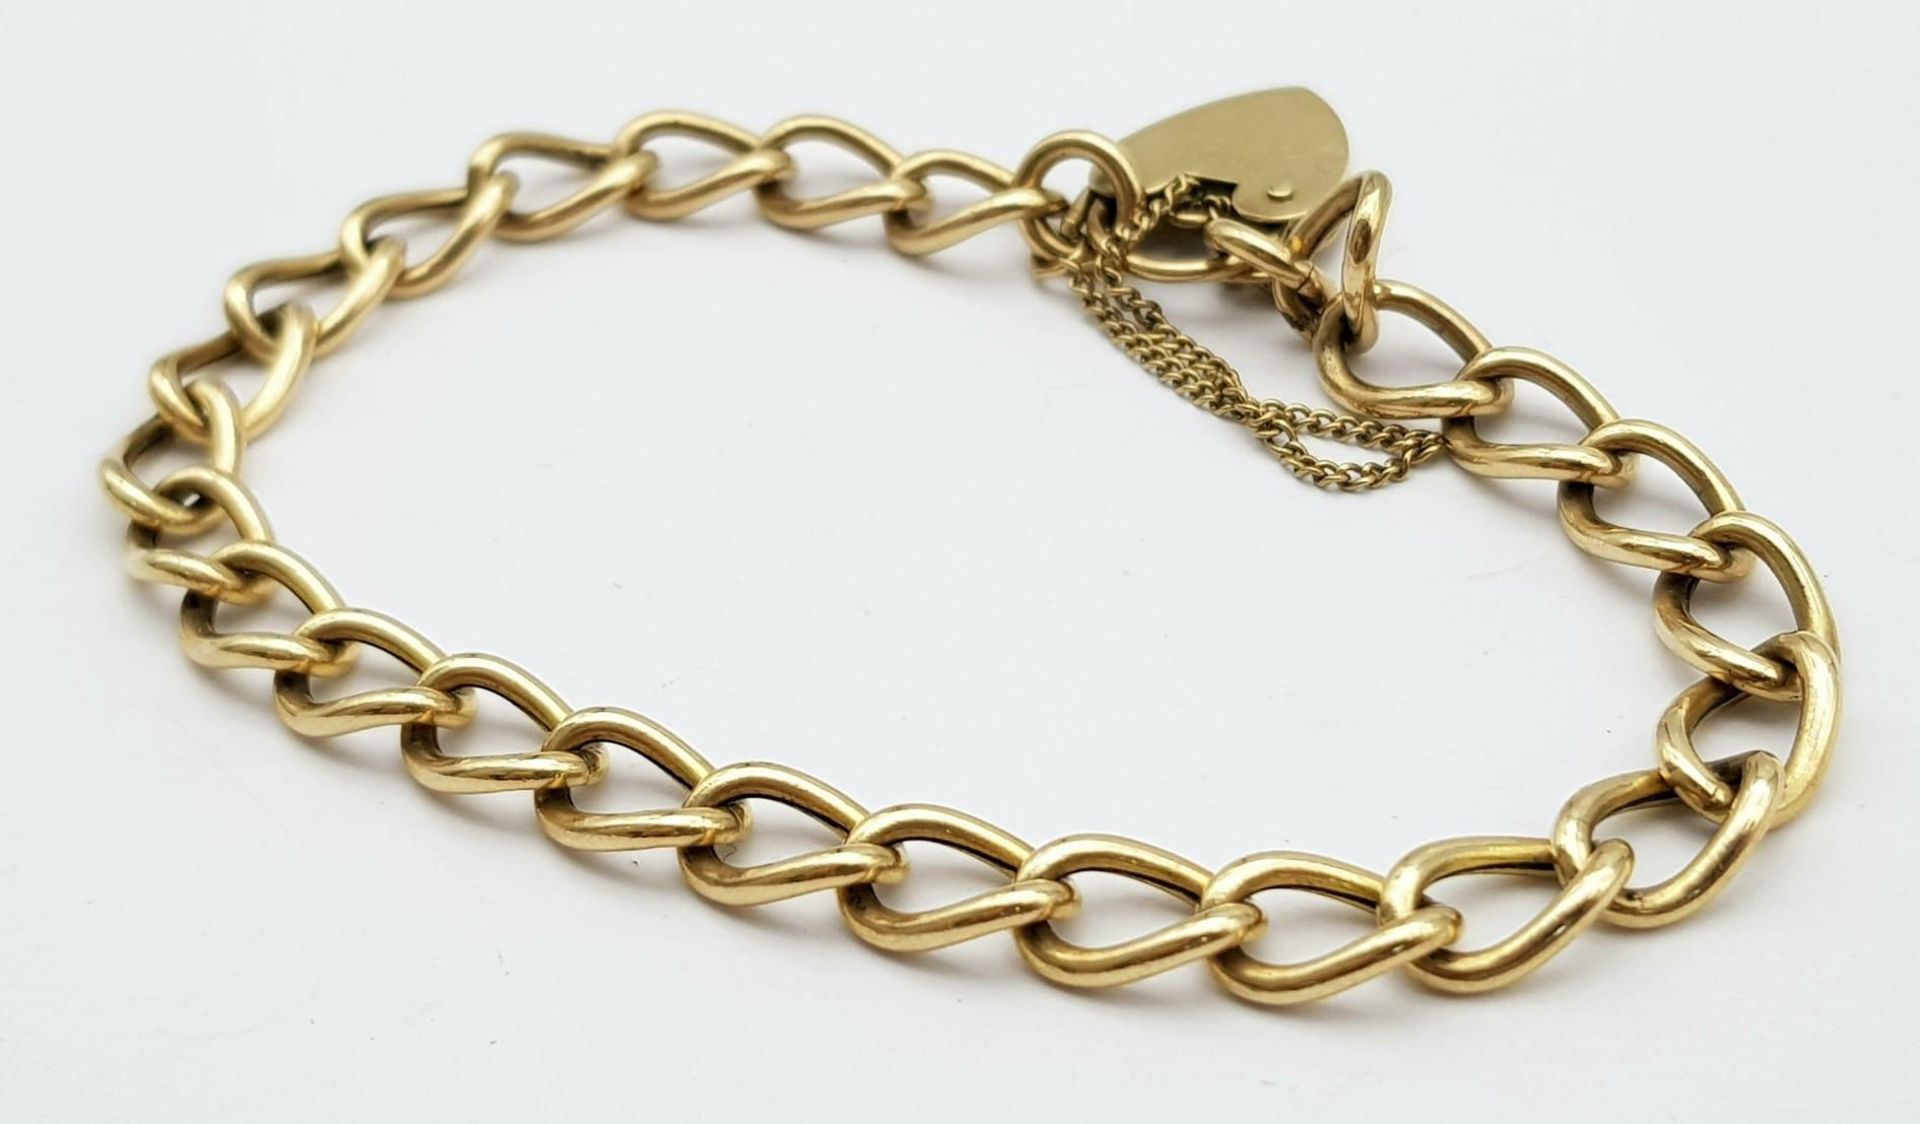 A Vintage 9K Yellow Gold Curb Link Bracelet with Heart Clasp. 18cm. 8.4g weight. - Bild 3 aus 4